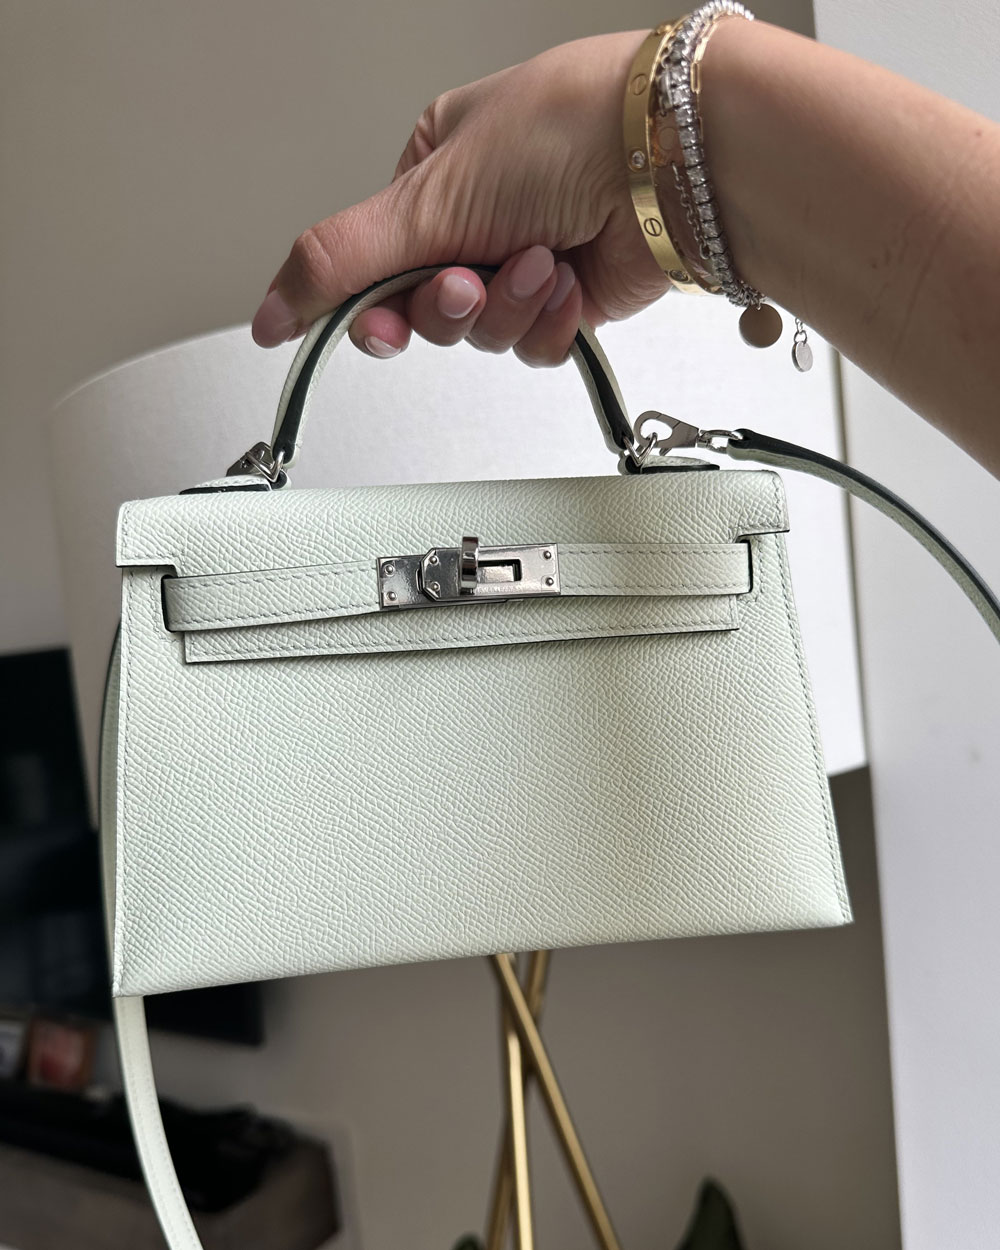 I Can't Stop Thinking About Buying a Polène Paris Bag - PurseBlog